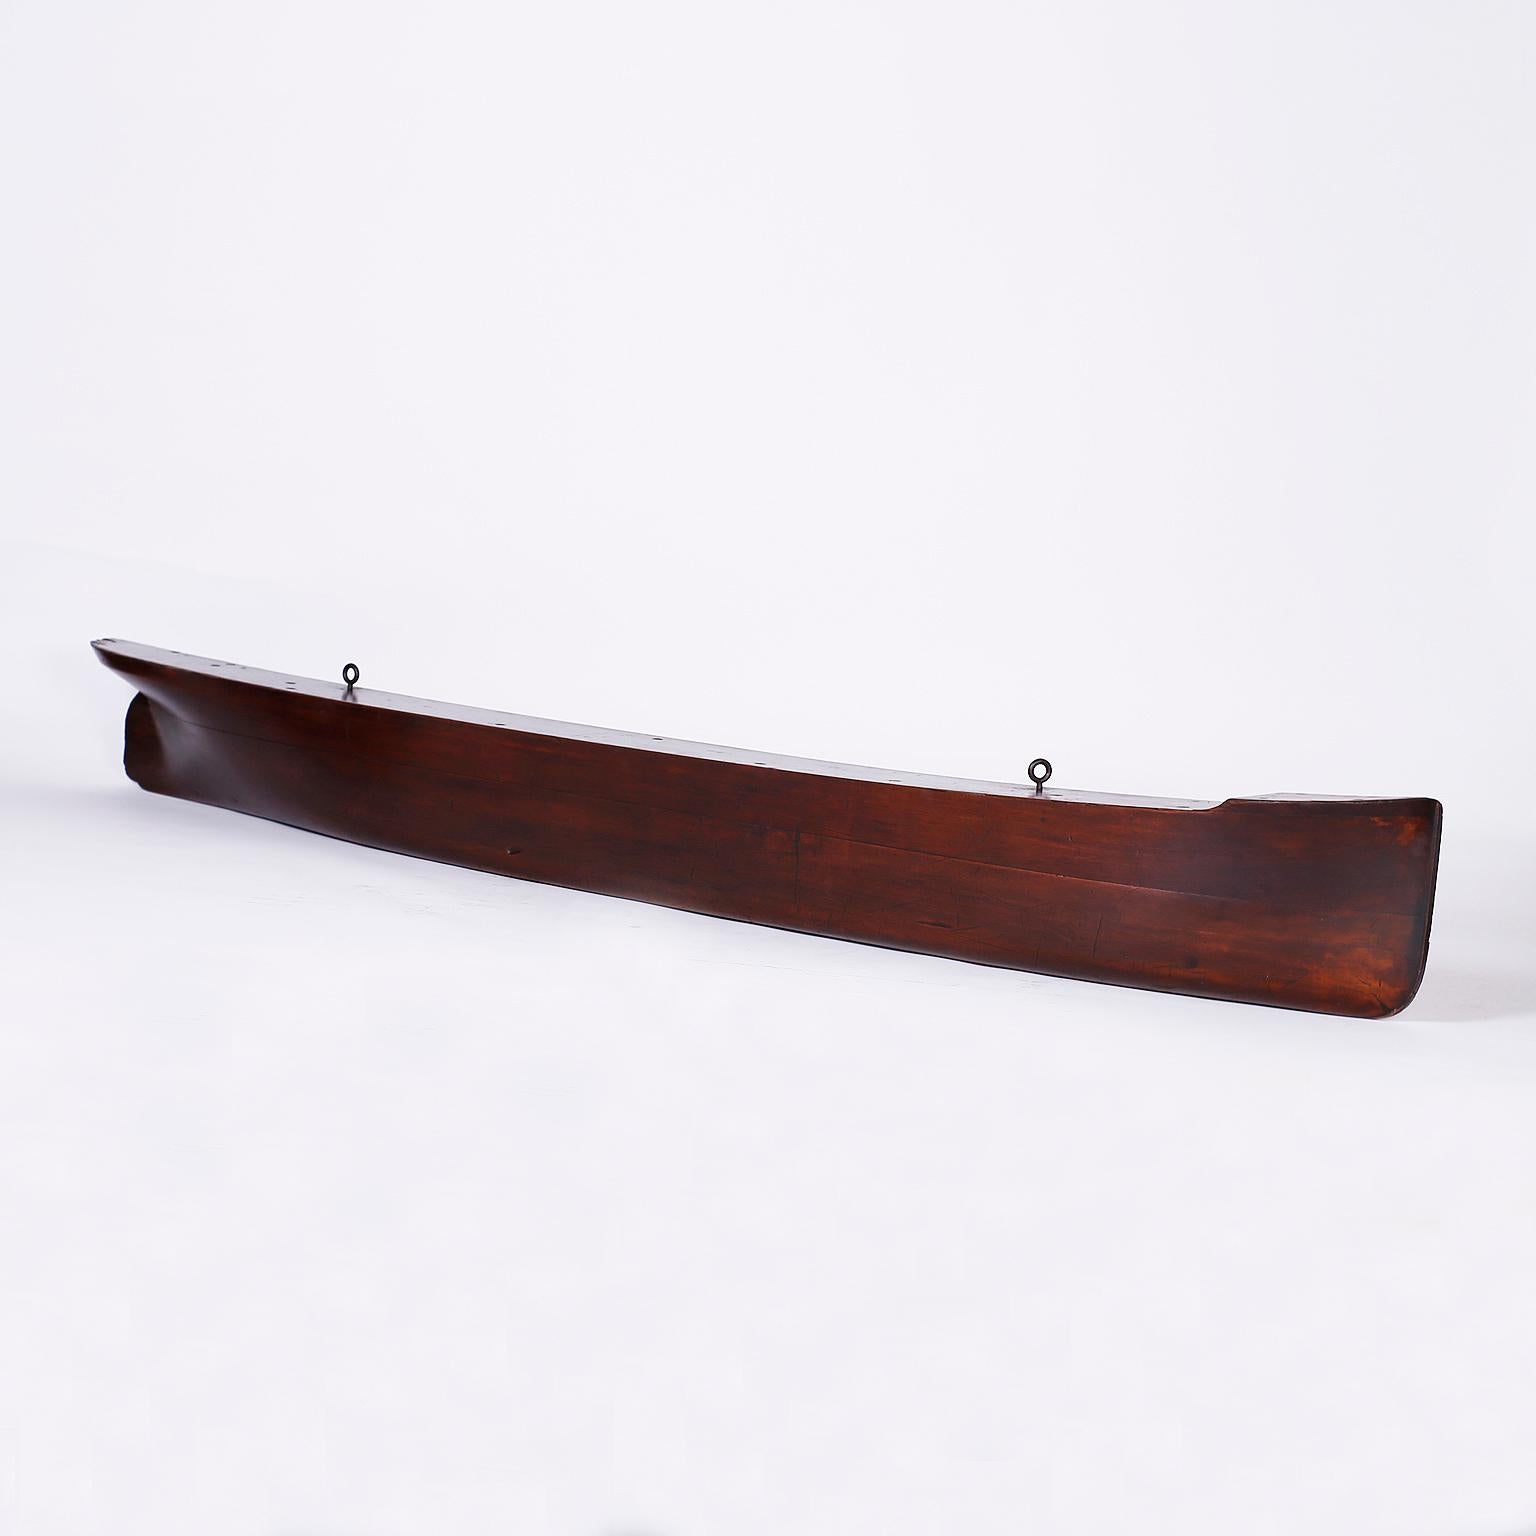 Super large antique English half hull model of a sailing ship crafted in indigenous hardwood with a graceful sea going form and plenty of decorative appeal.